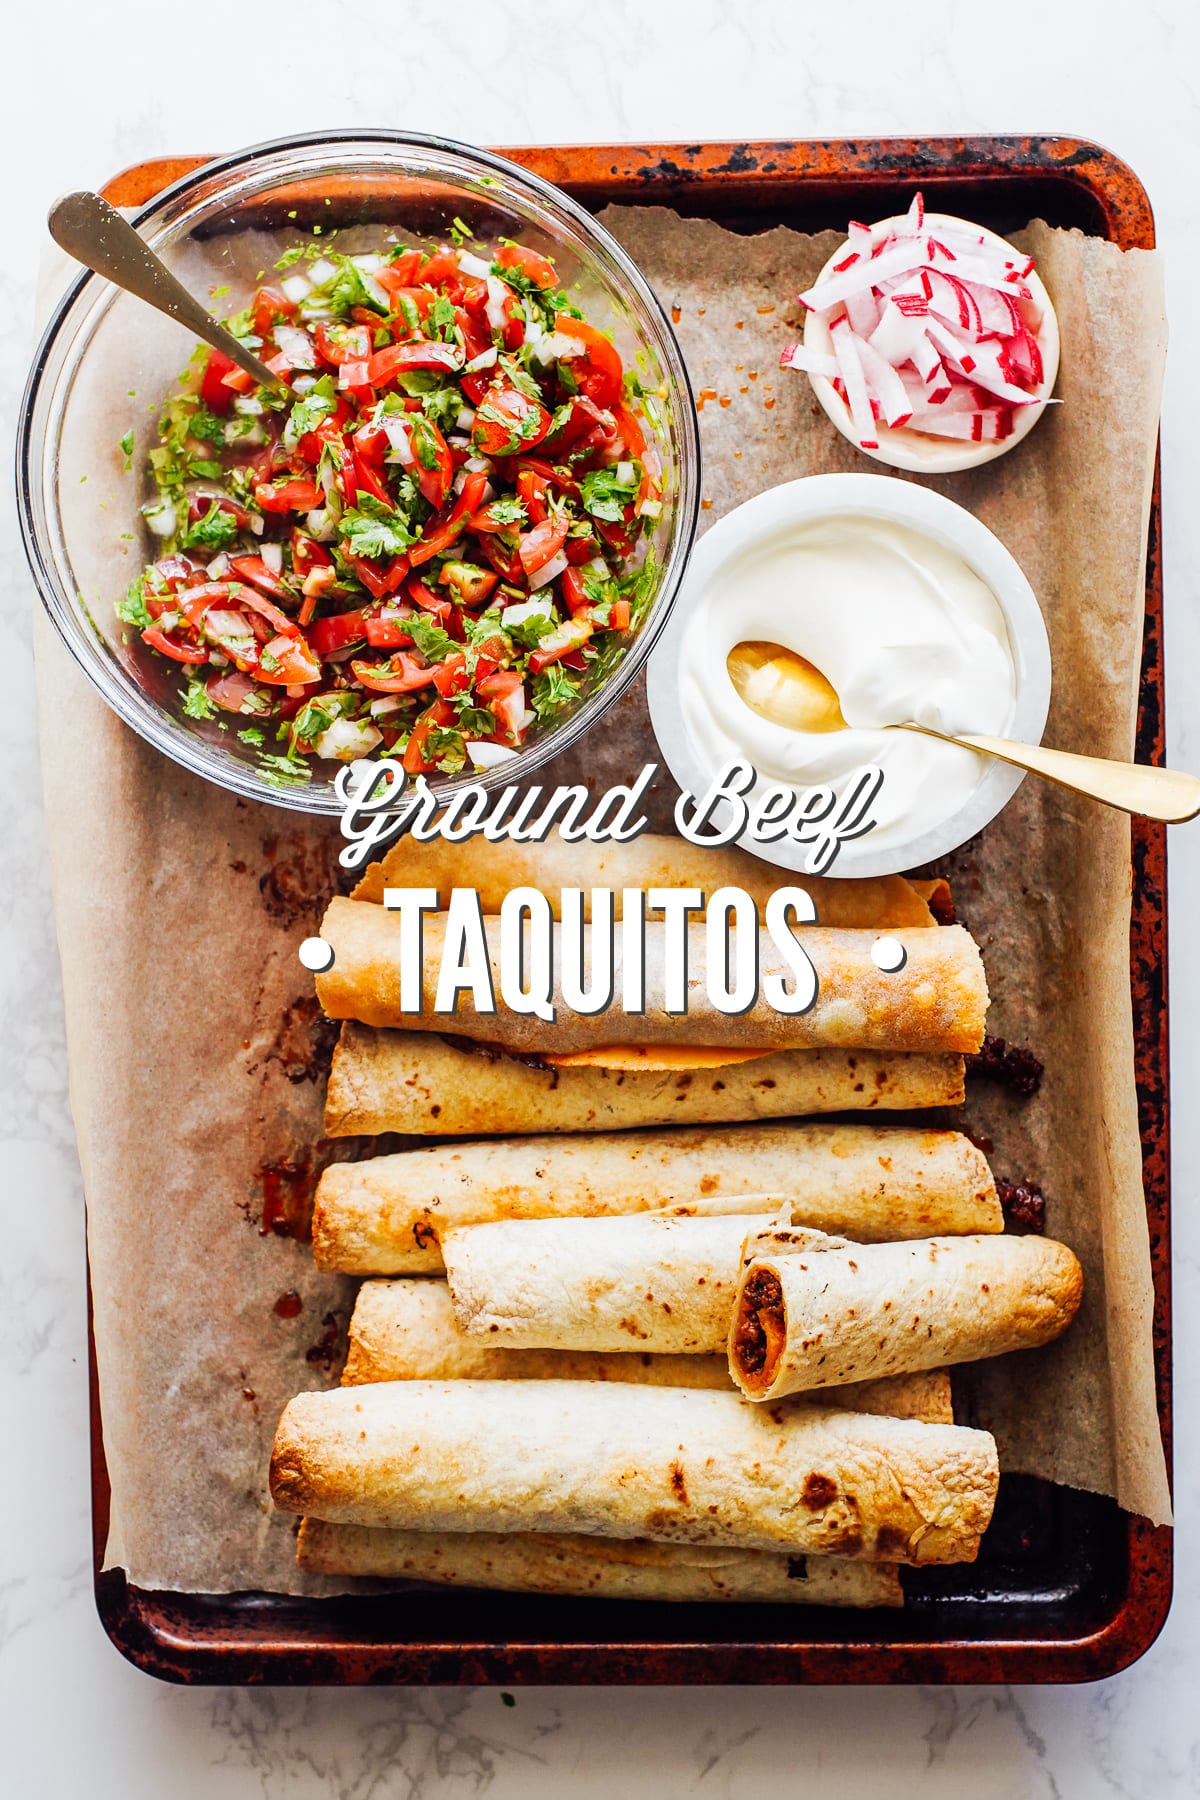 Baked Ground Beef Taquitos